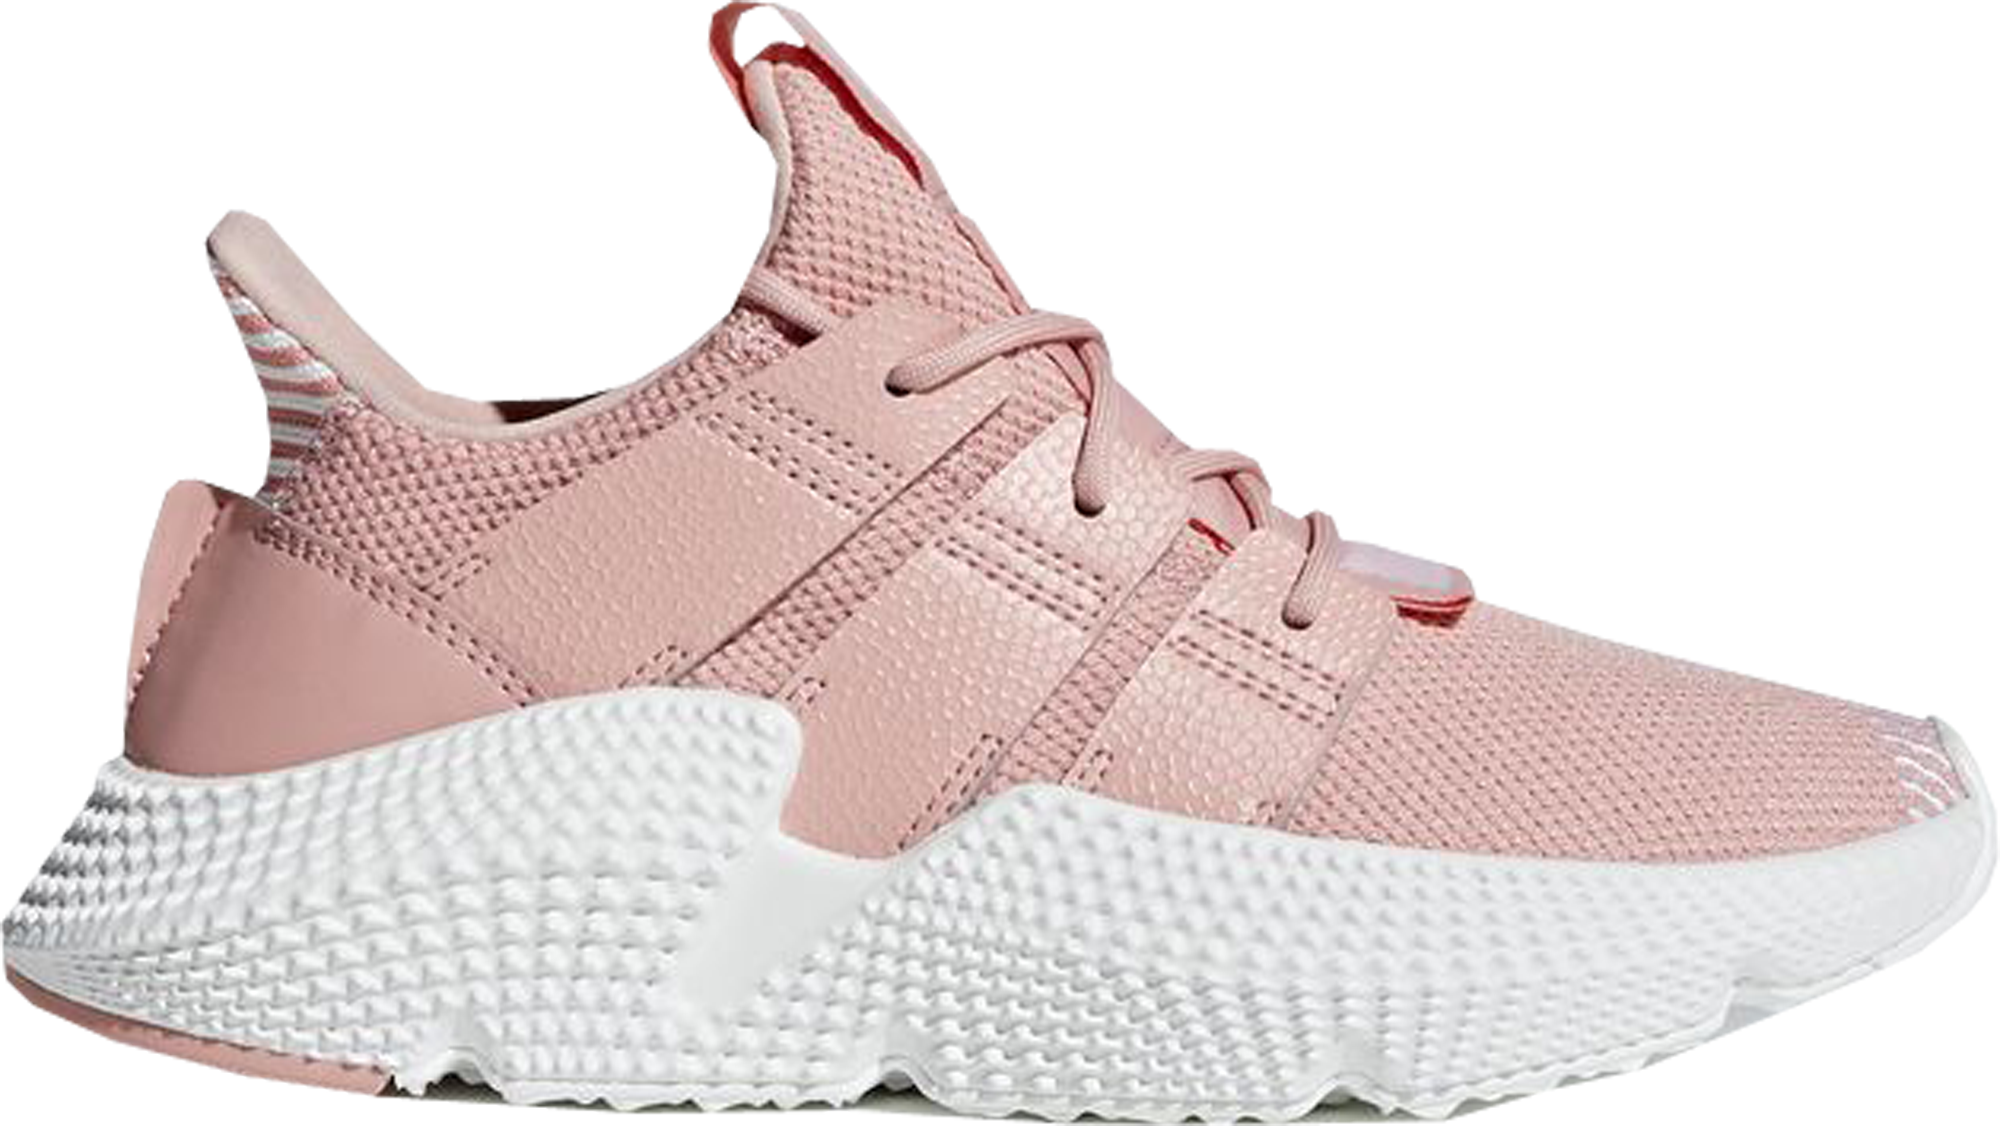 adidas Prophere Trace Pink (Youth) - B41881